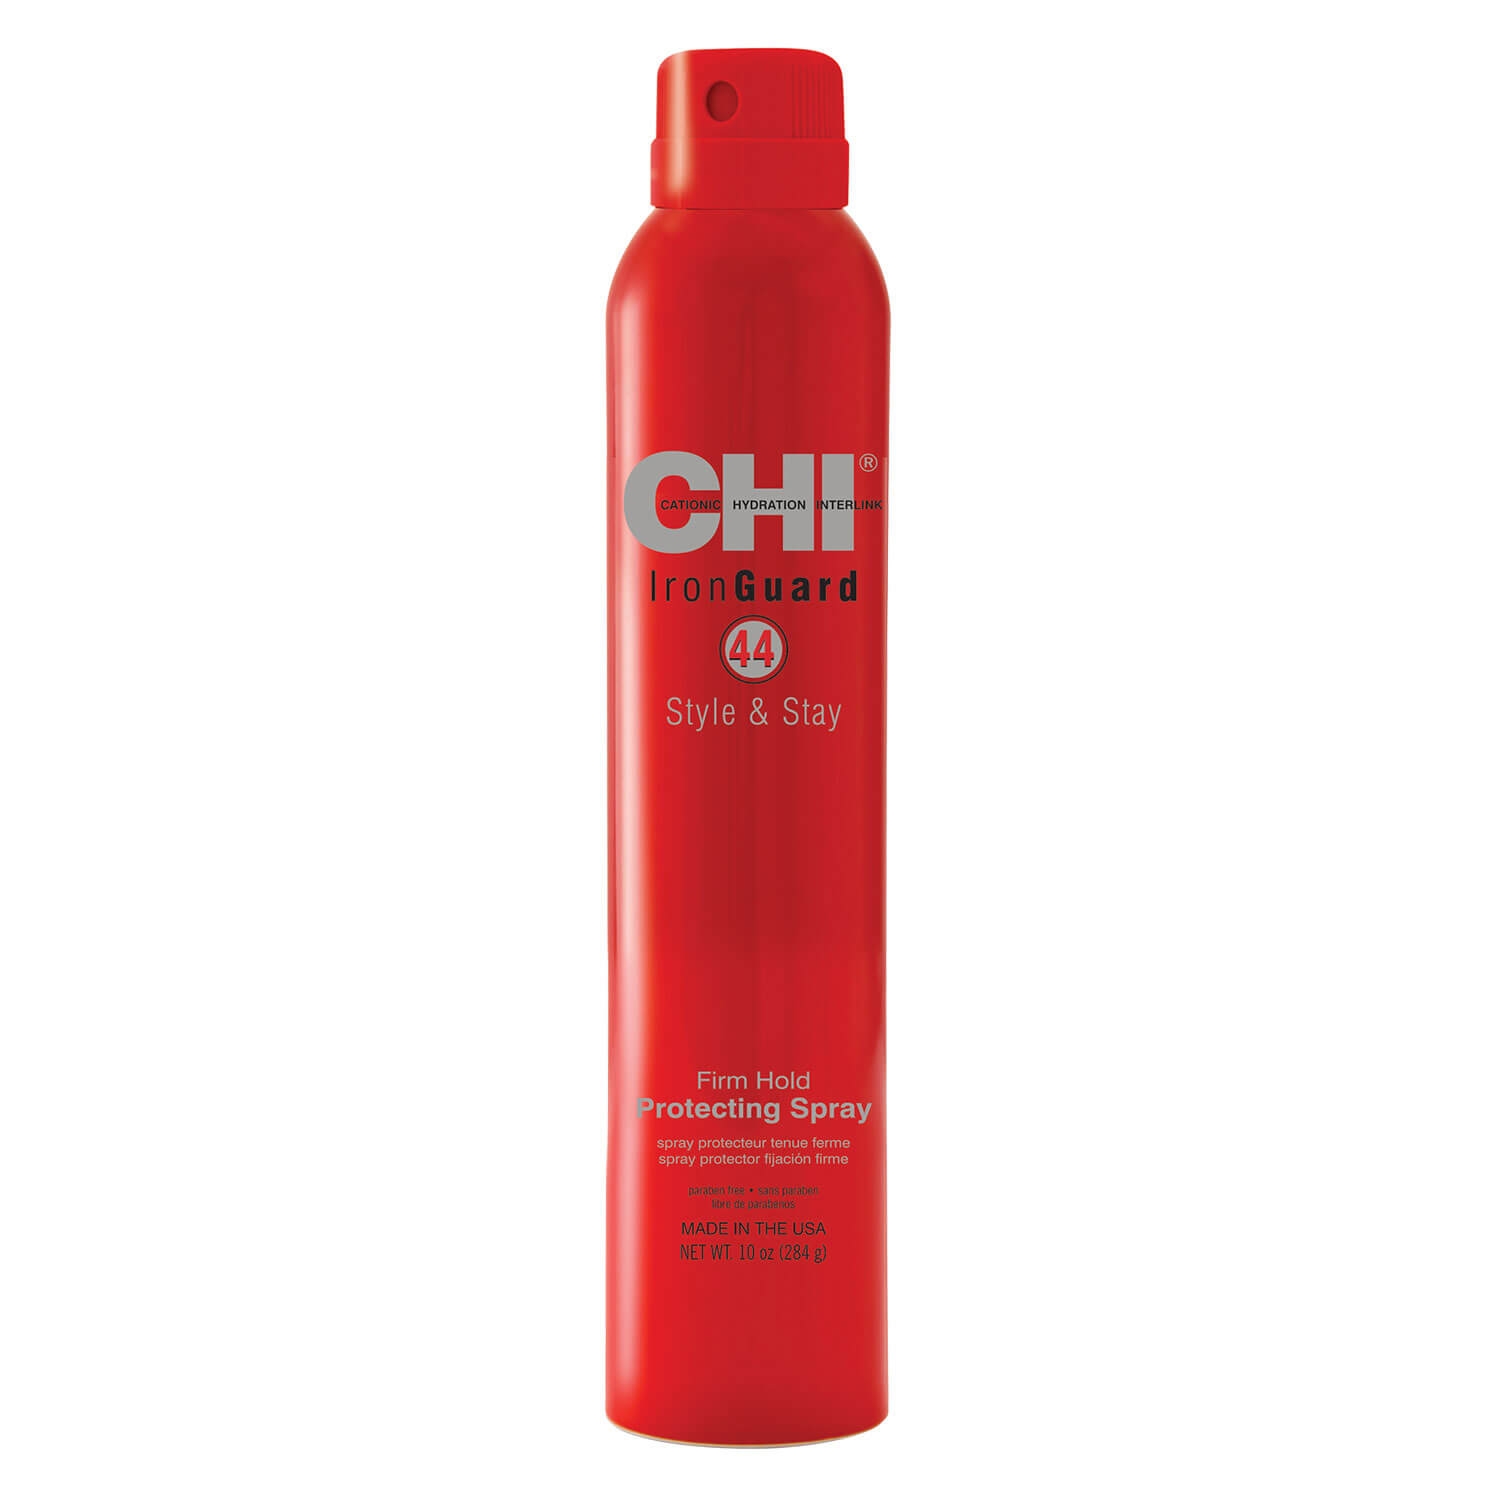 Image du produit de CHI 44 Iron Guard - Style & Stay Firm Hold Protecting Spray